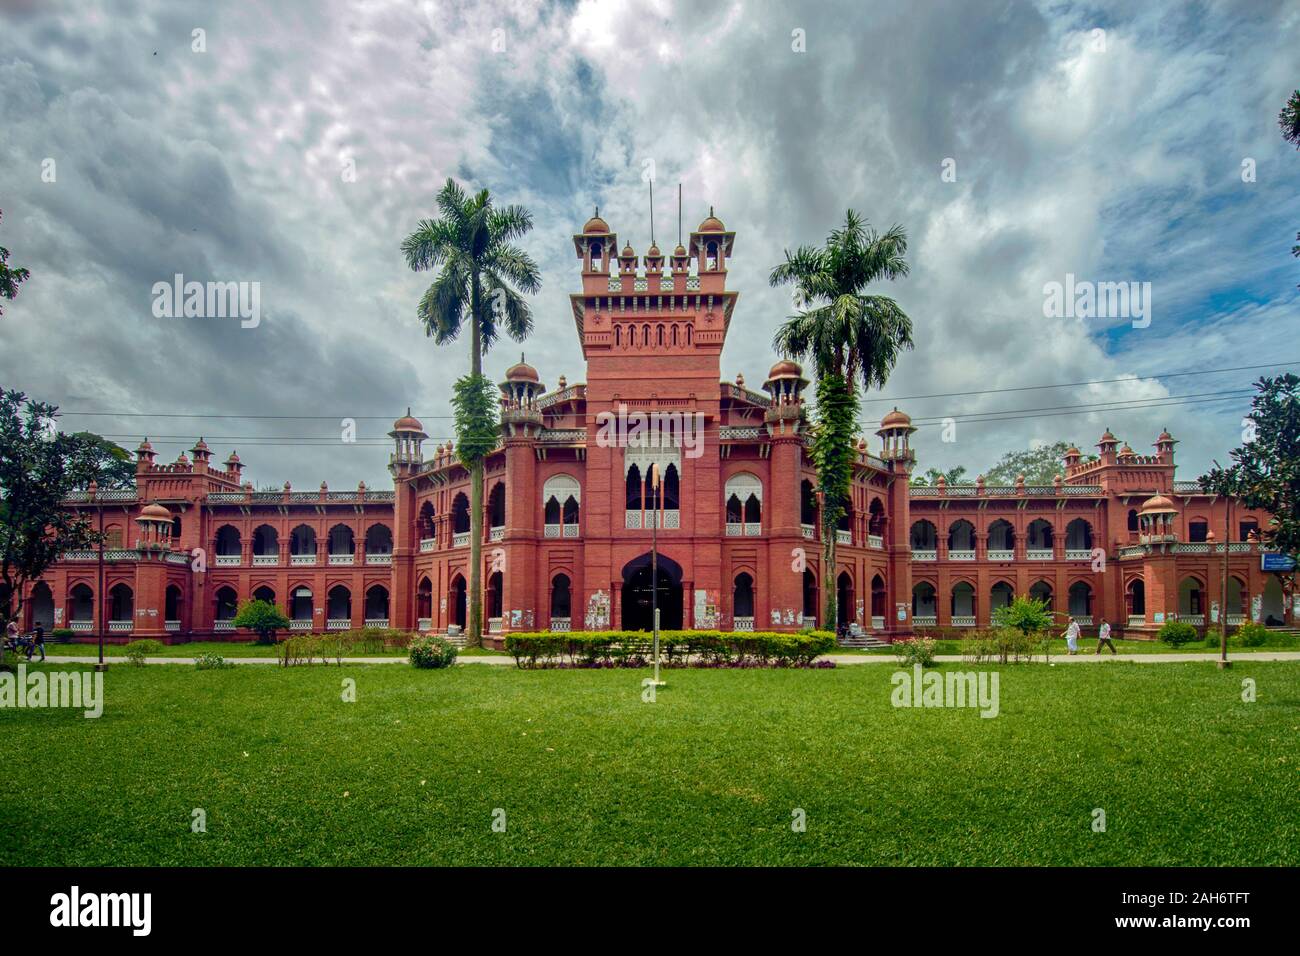 The Curzon Hall is a British Raj-era building and home of the Faculty of Science at the University of Dhaka. Stock Photo